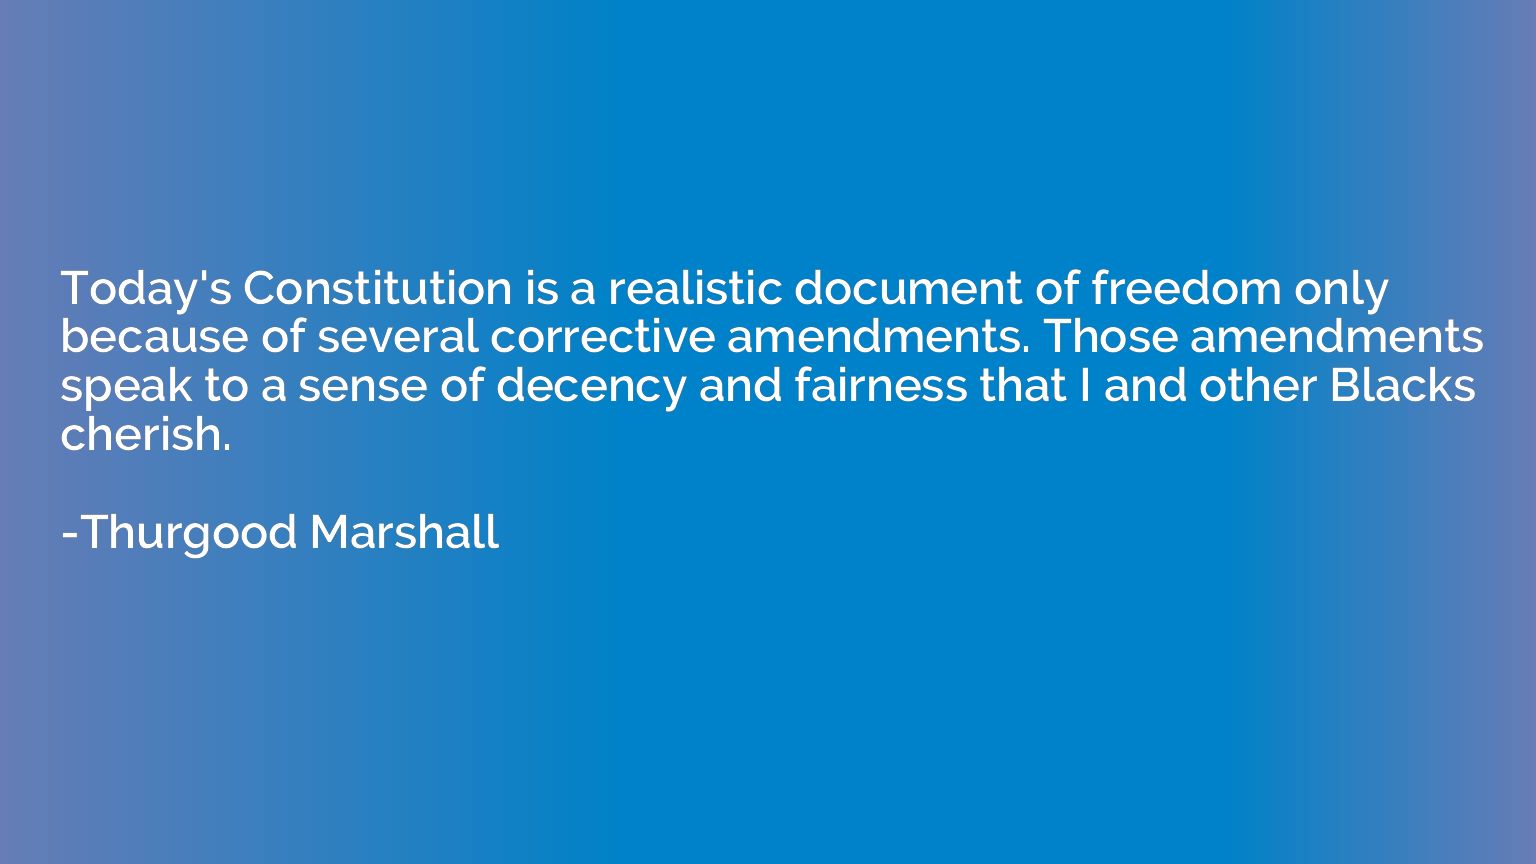 Today's Constitution is a realistic document of freedom only